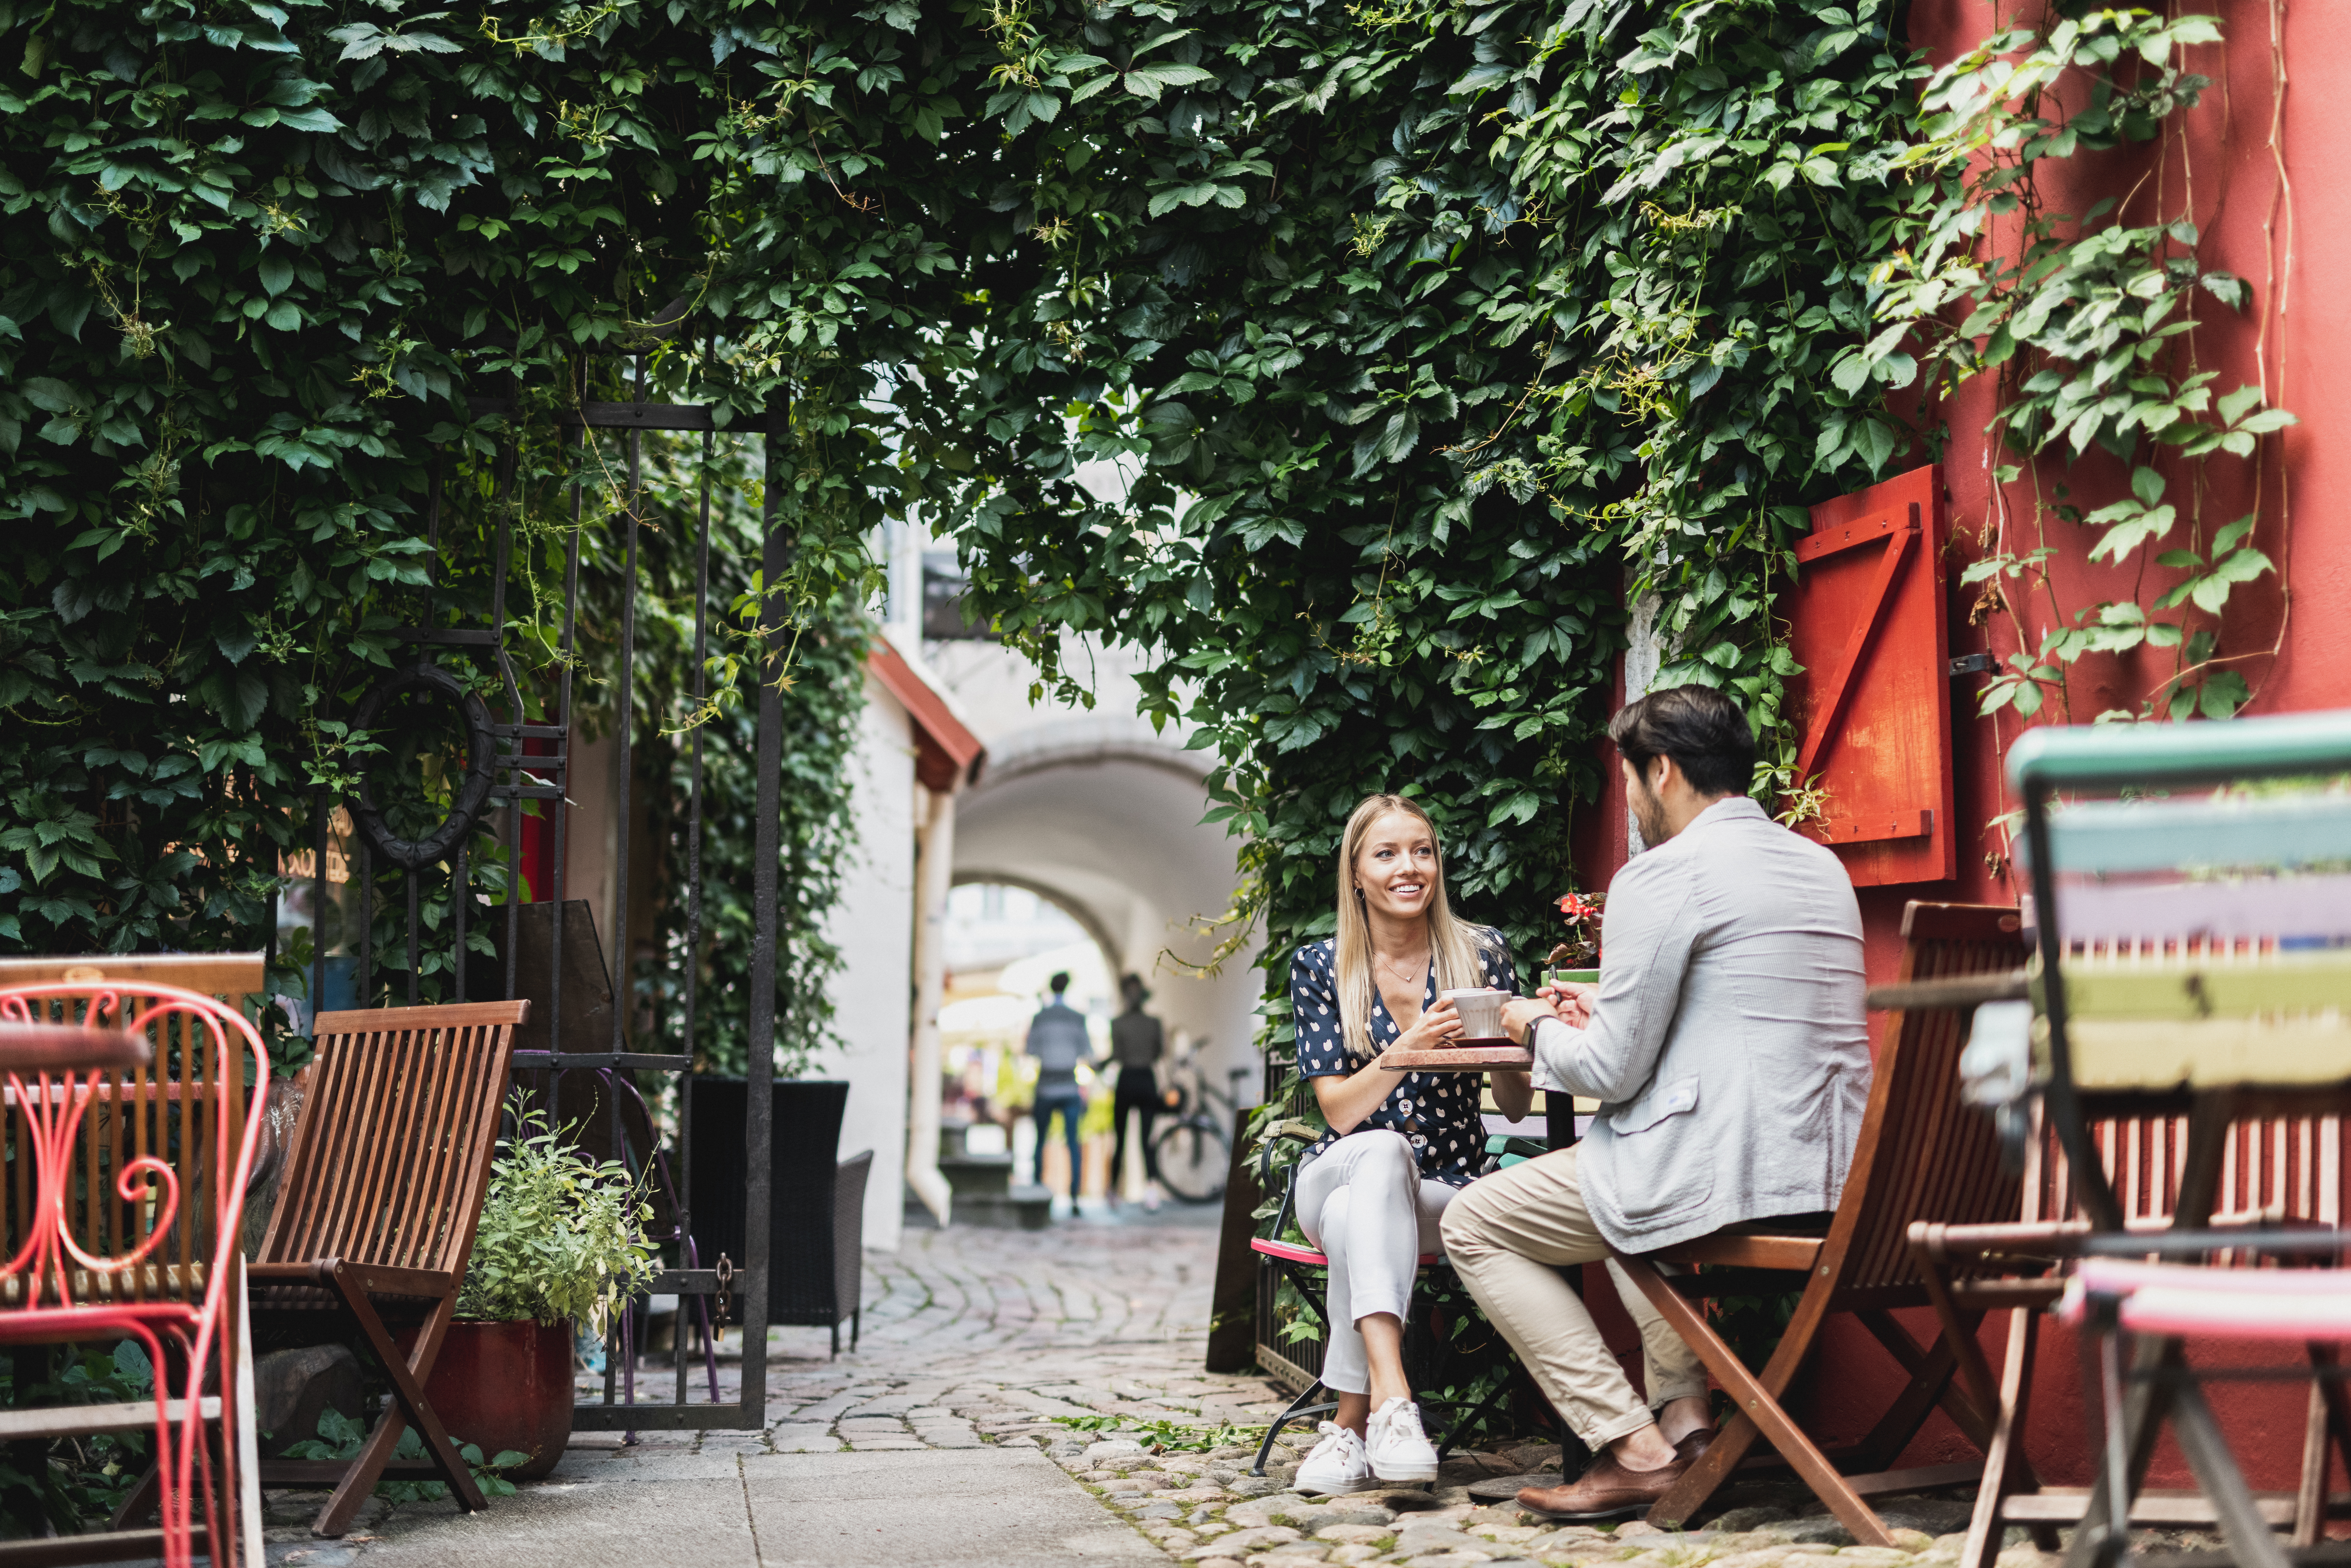 A couple sitting and enjoying a drink at a cafe in the Old town of  Tallinn, Estonia